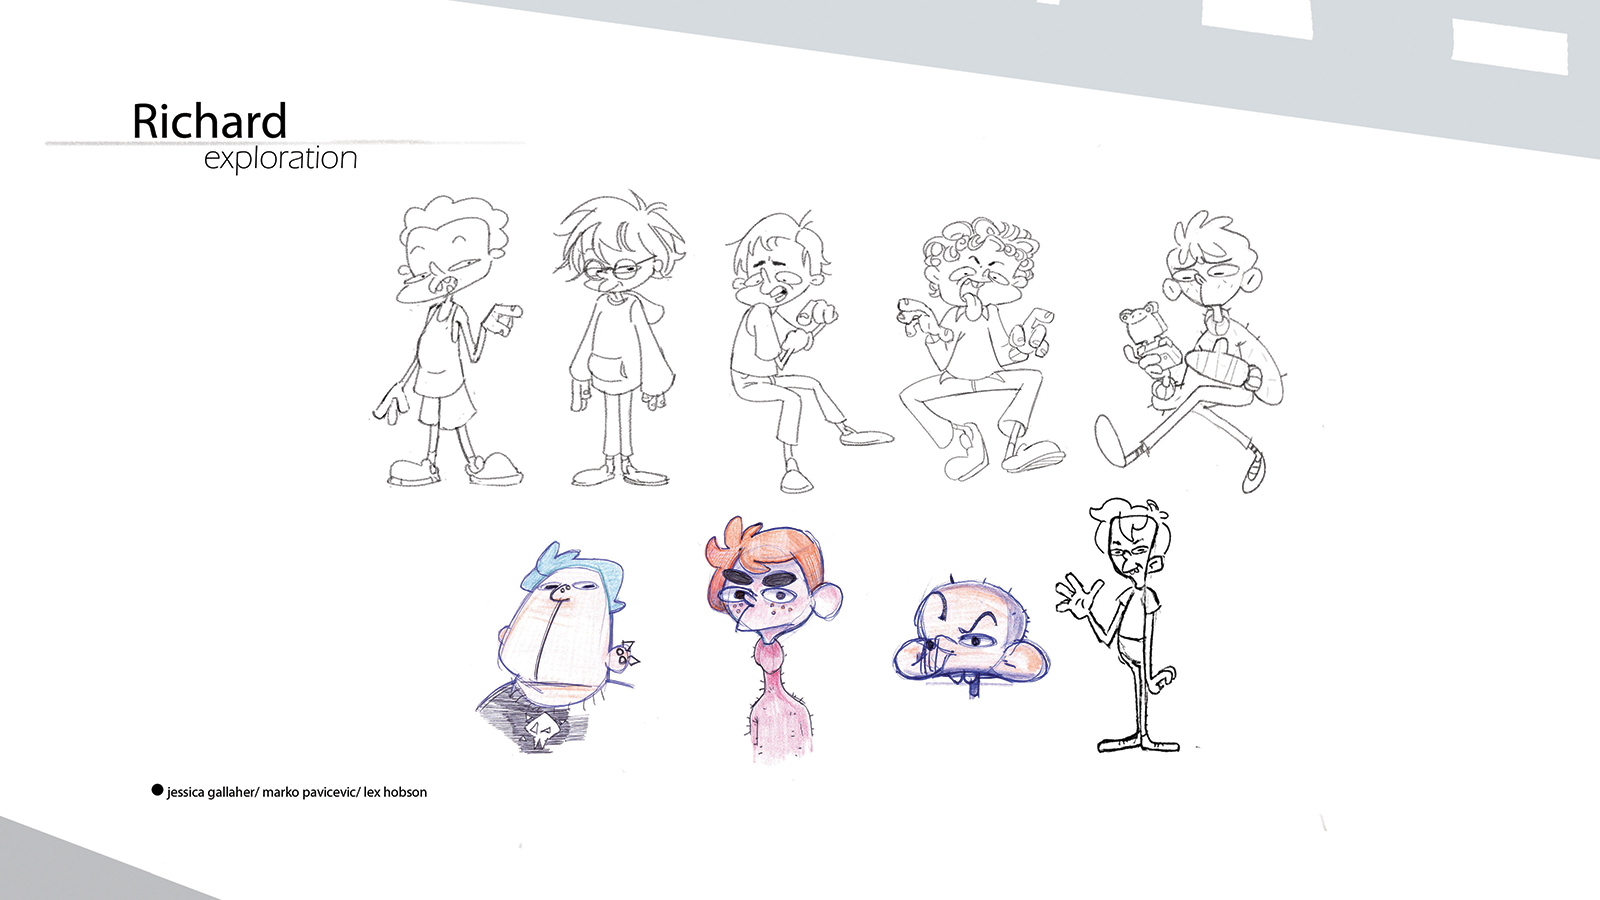 Concepts and sketches for Flap character Richard.